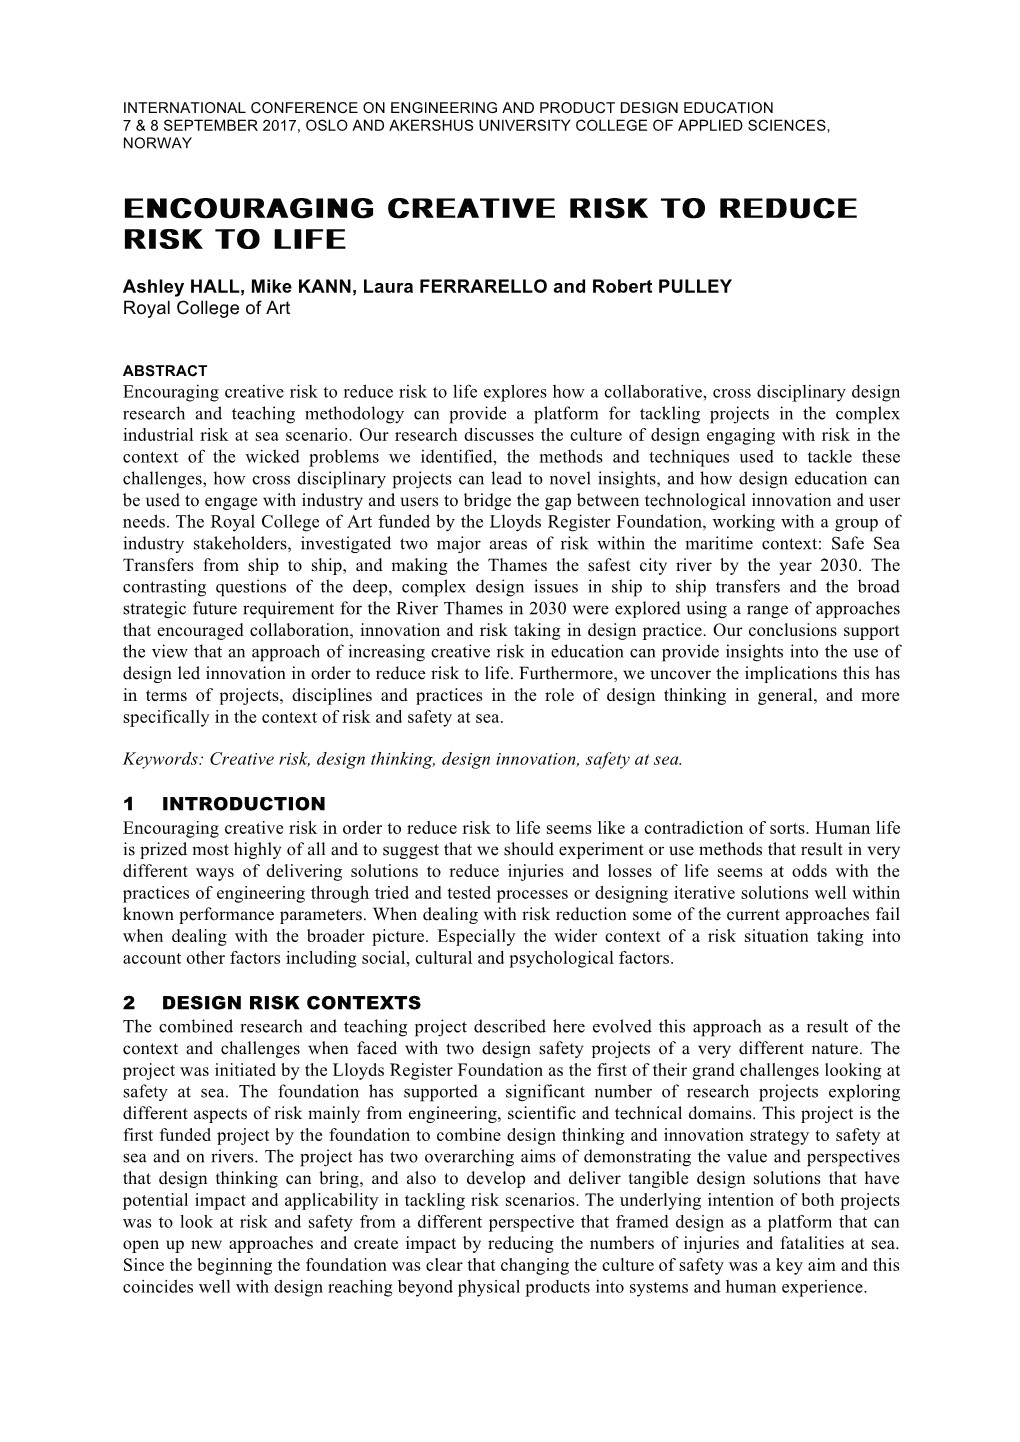 Encouraging Creative Risk to Reduce Risk to Life